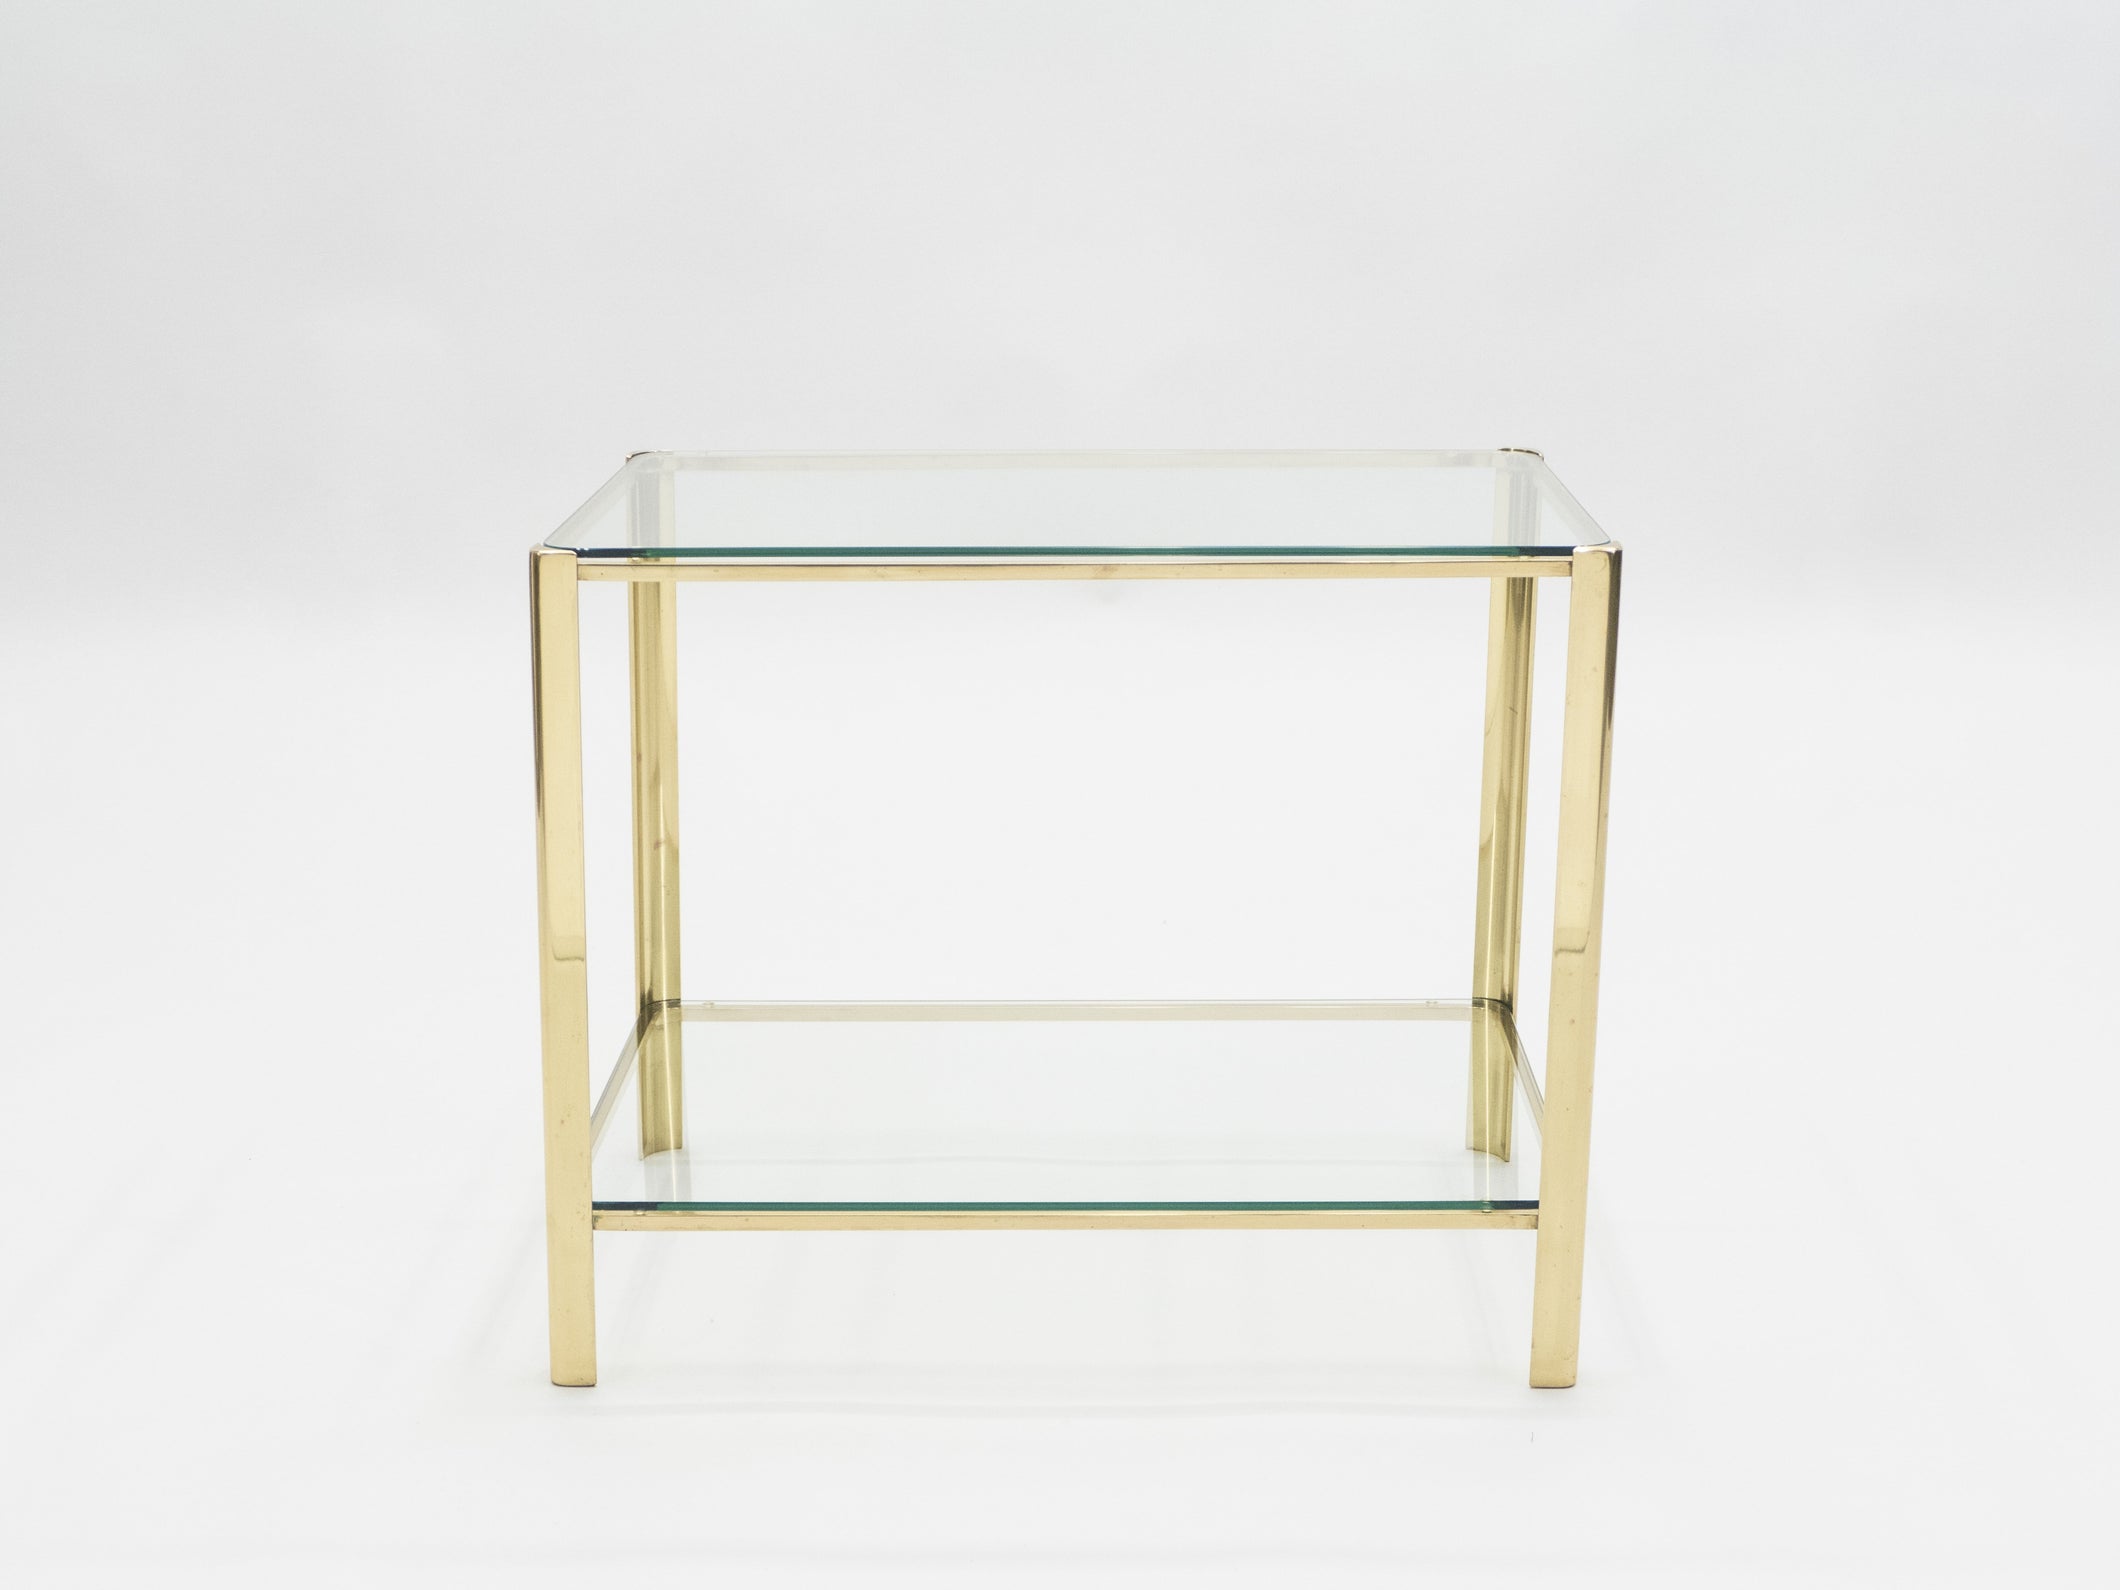 French Bronze occasional side table by J.T. Lepelletier for Broncz 1960s